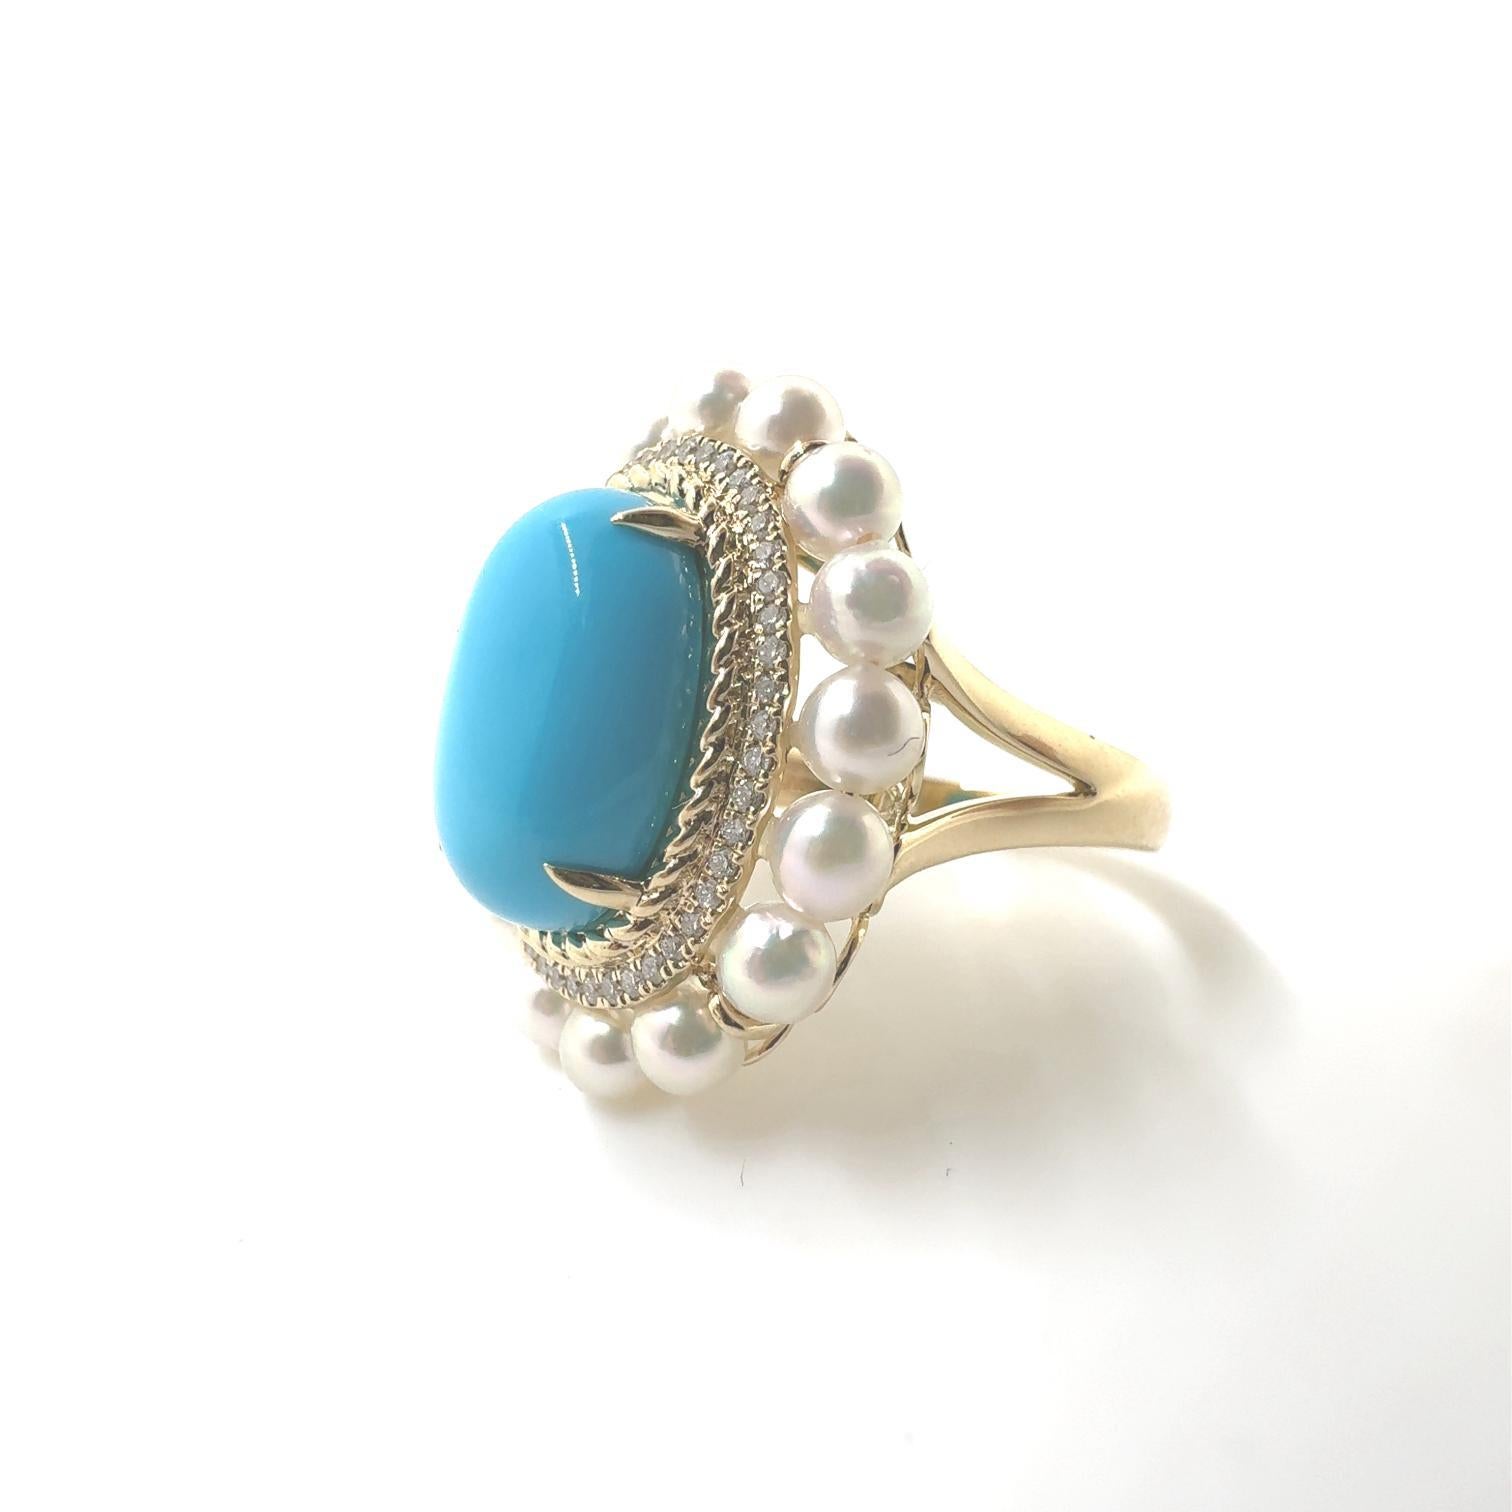 5.15Ct Turquoise Cabochon Pearl Diamond Ring in 14 Karat Yellow Gold 1